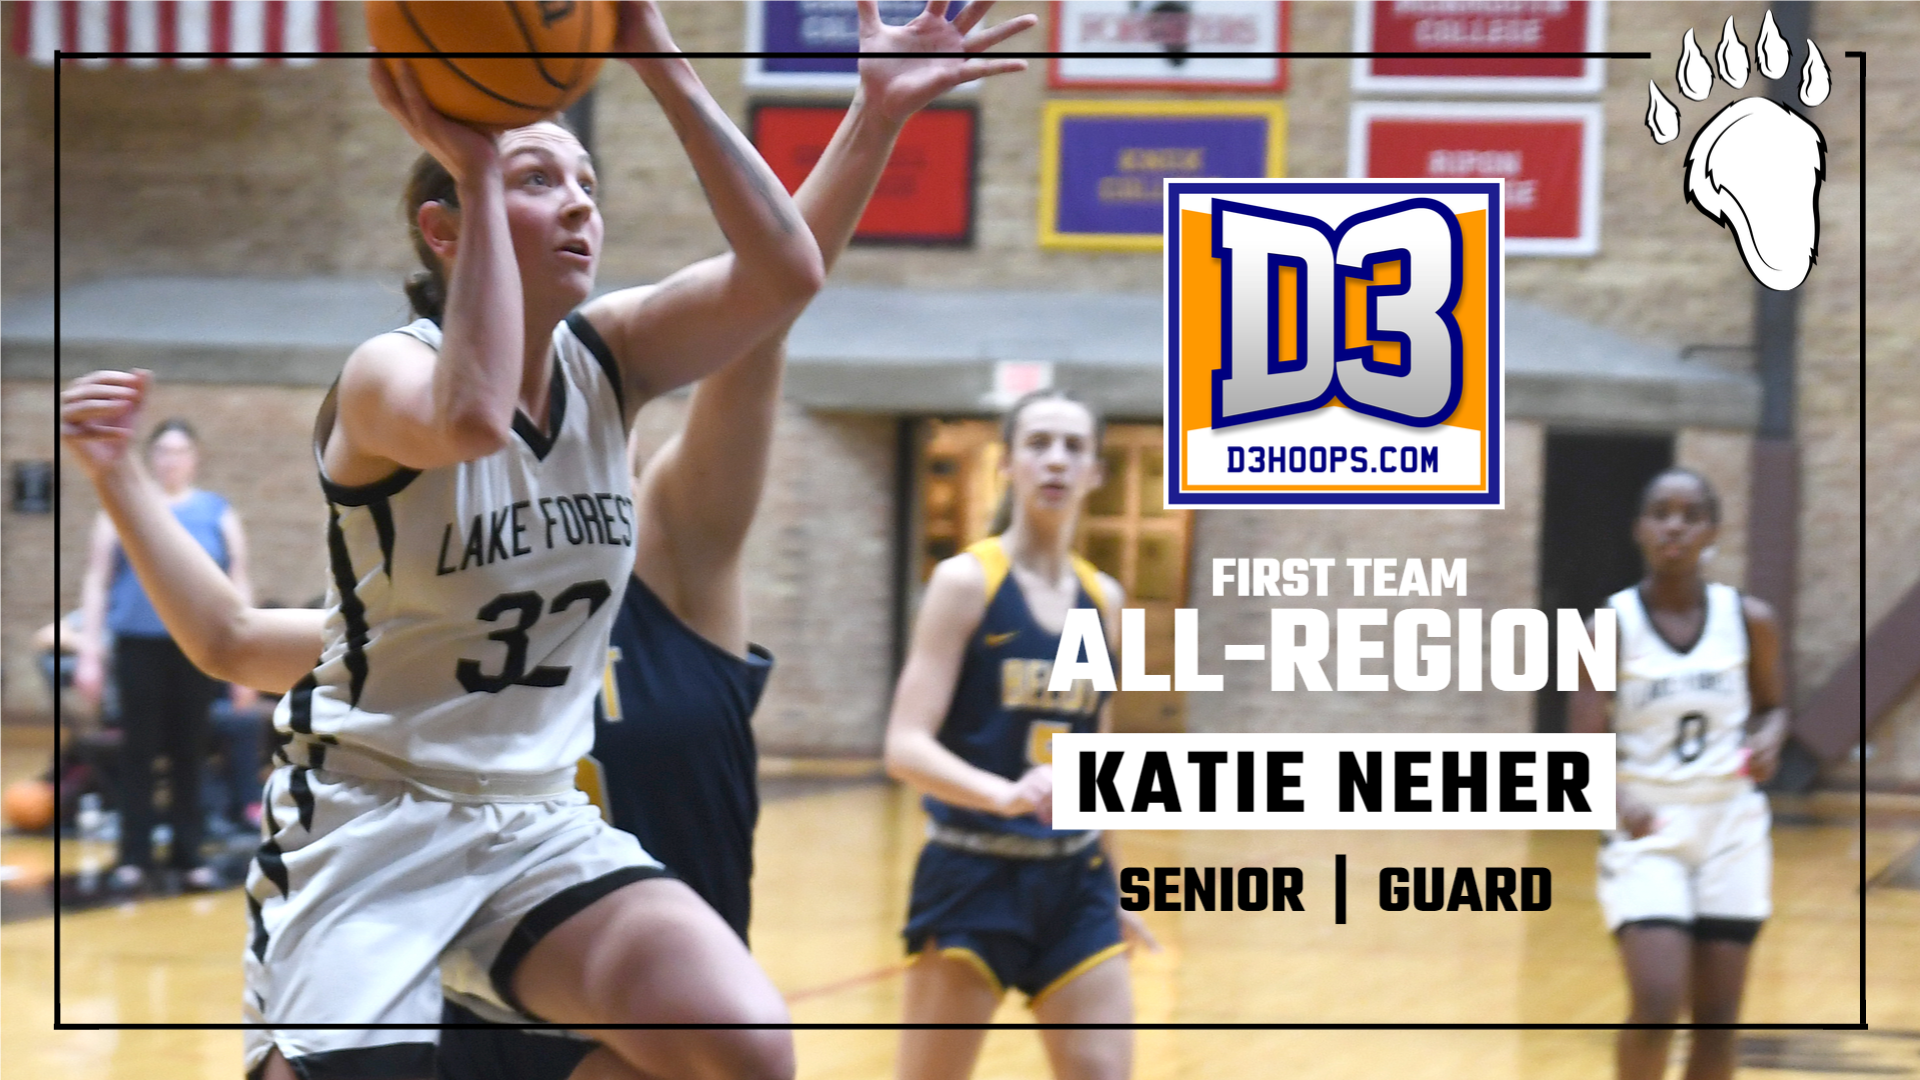 Katie Neher Receives First Team All-Region Honors from D3hoops.com